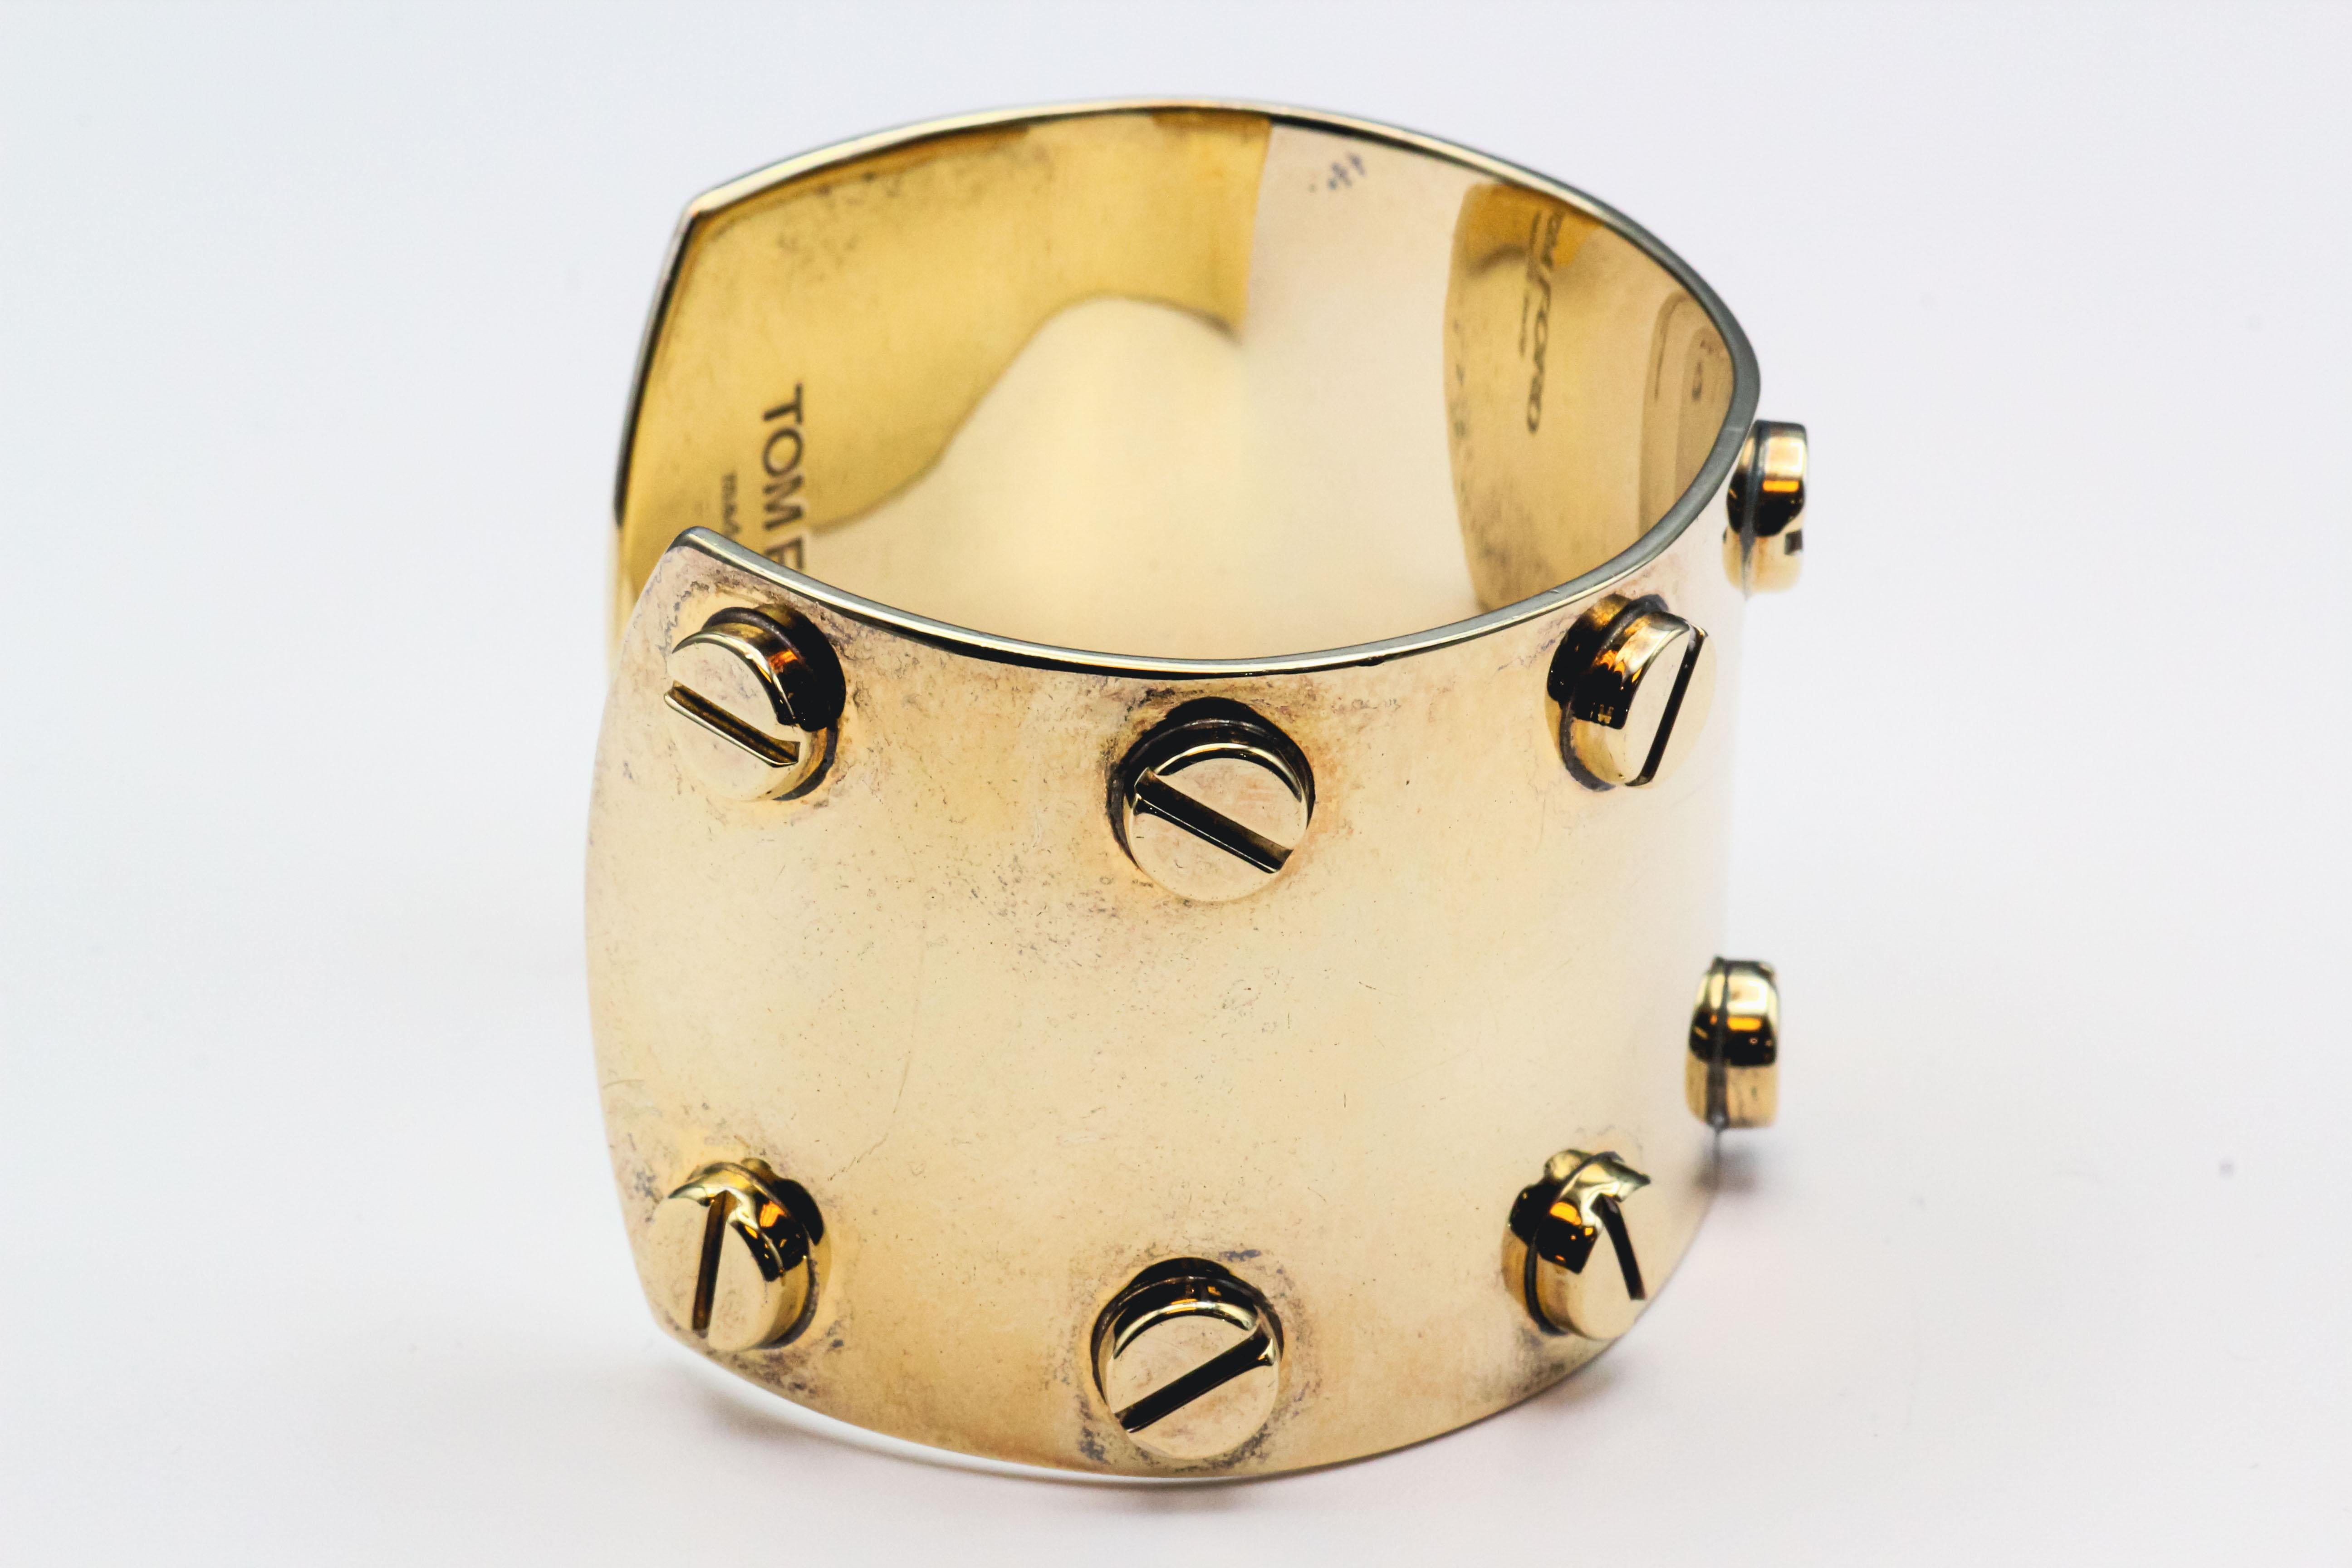 Elevate your style with the bold and edgy elegance of the Tom Ford gold-plated silver screw cuff bracelet. Designed to make a statement, this piece exudes a sense of modern luxury and sophistication.

Crafted from high-quality silver and plated with